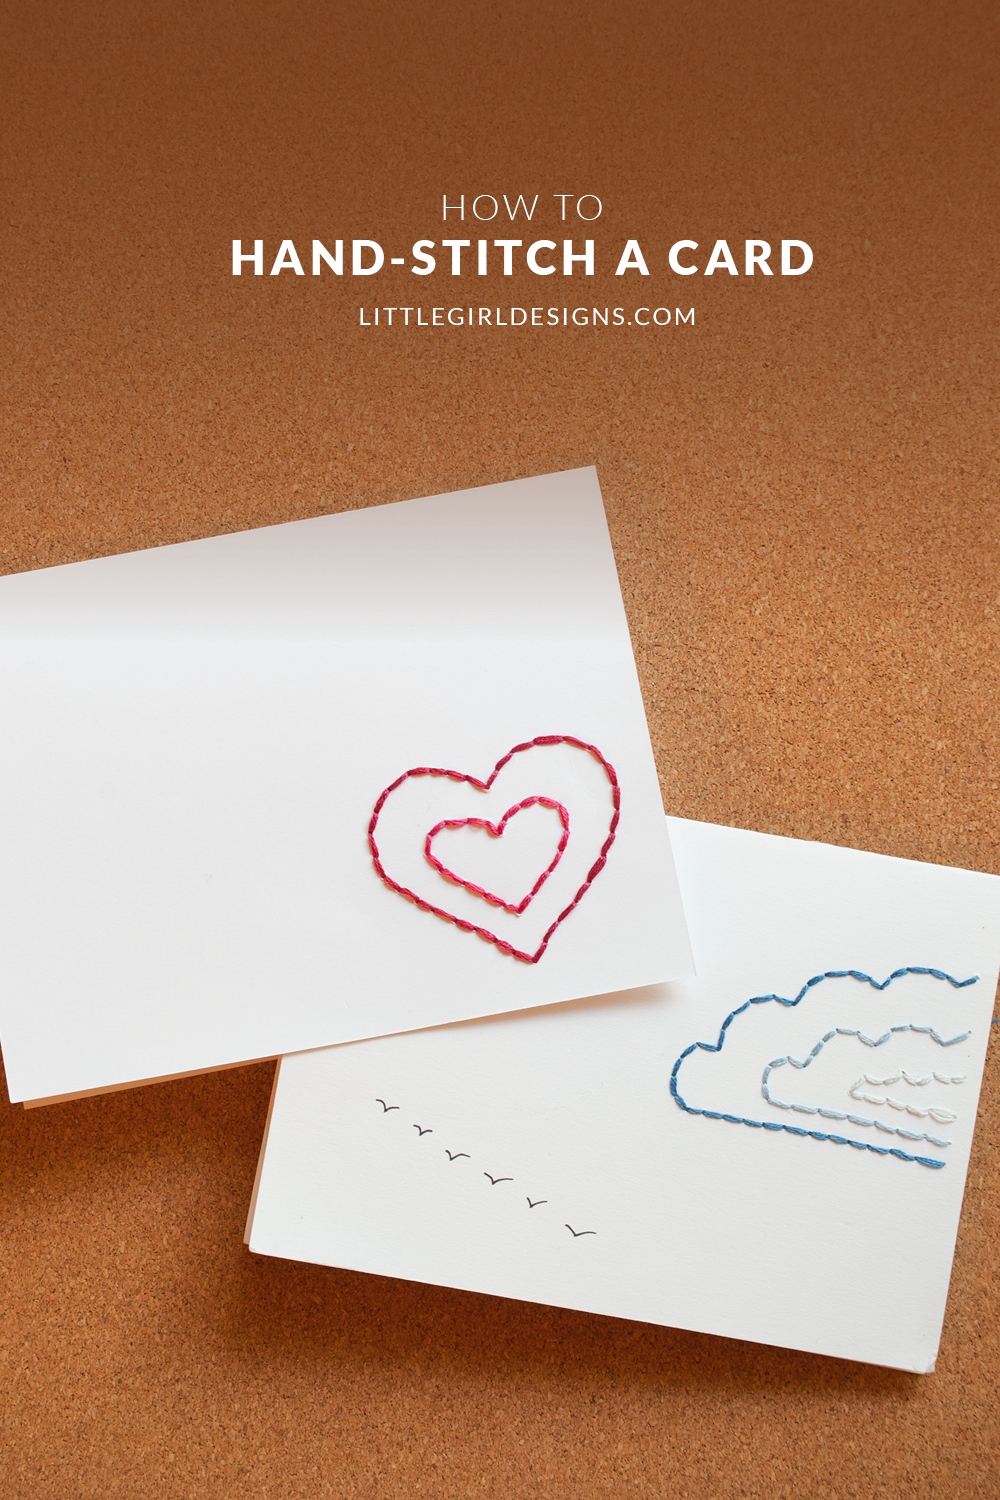 What a wonderful way to send a personal note in the mail! These DIY hand stitched cards kick it up a little.